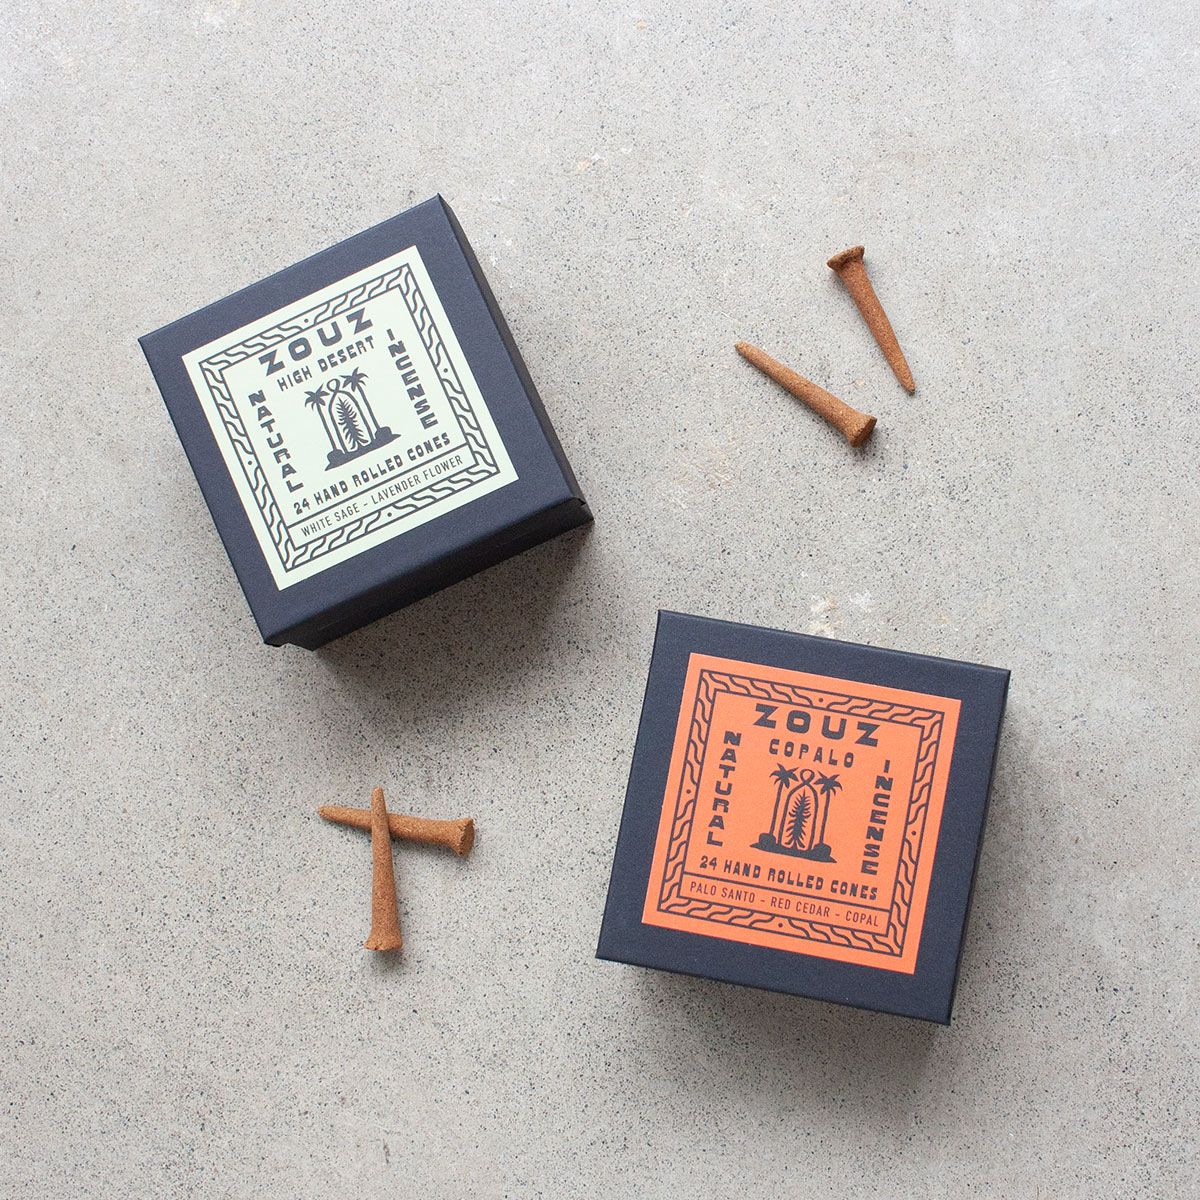 Two black boxes of Zouz incense on a concrete surface, one labeled "High Desert" with white sage and lavender, the other labeled "Copalo" with palo santo and red cedar. Four incense cones are placed around the boxes.